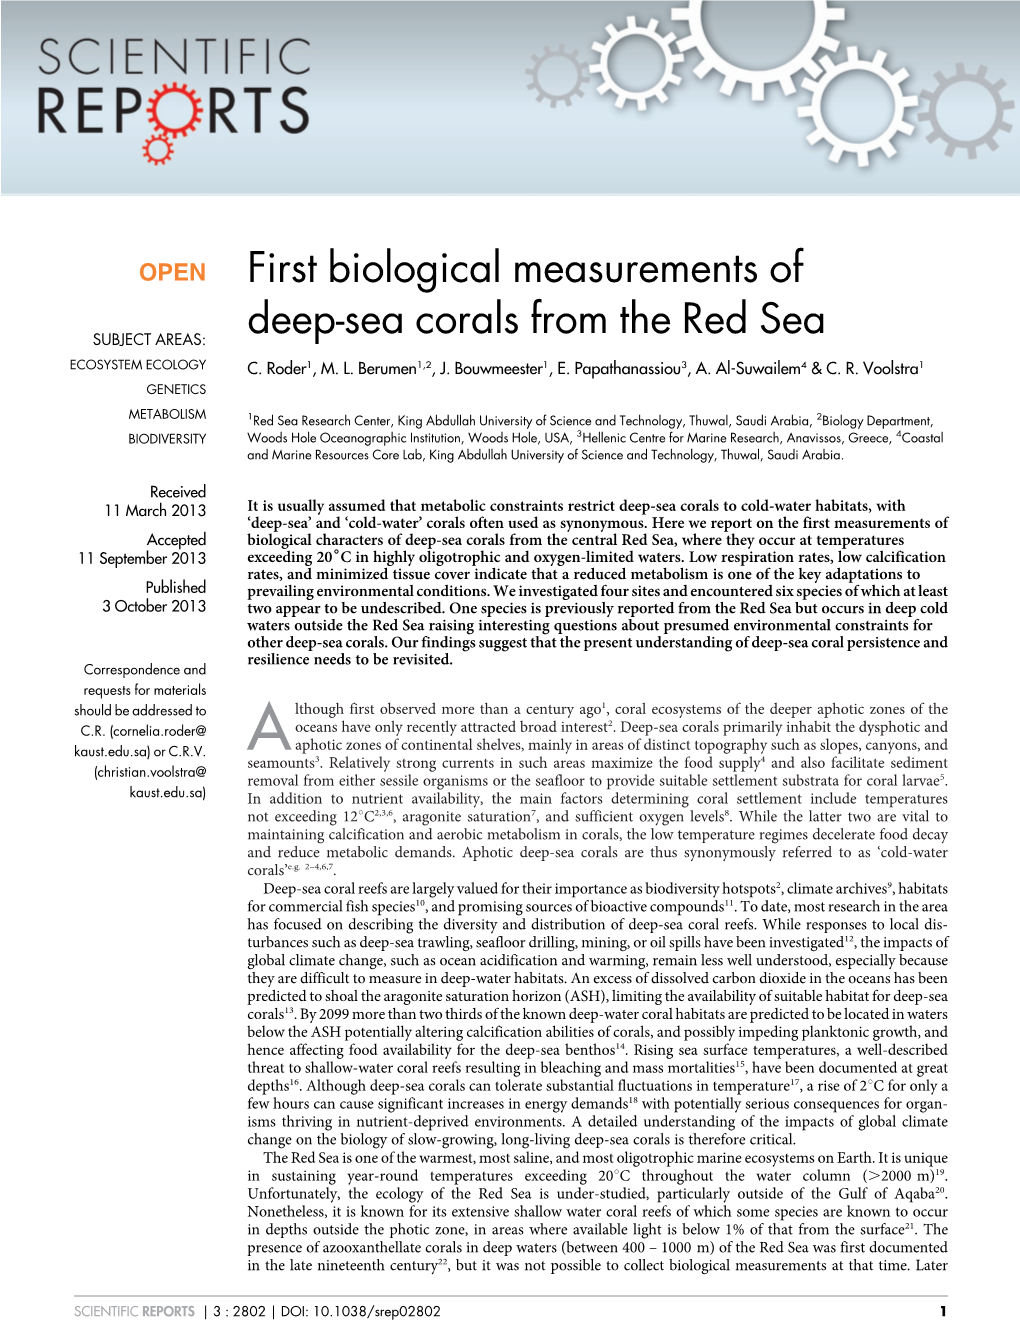 First Biological Measurements of Deep-Sea Corals from the Red